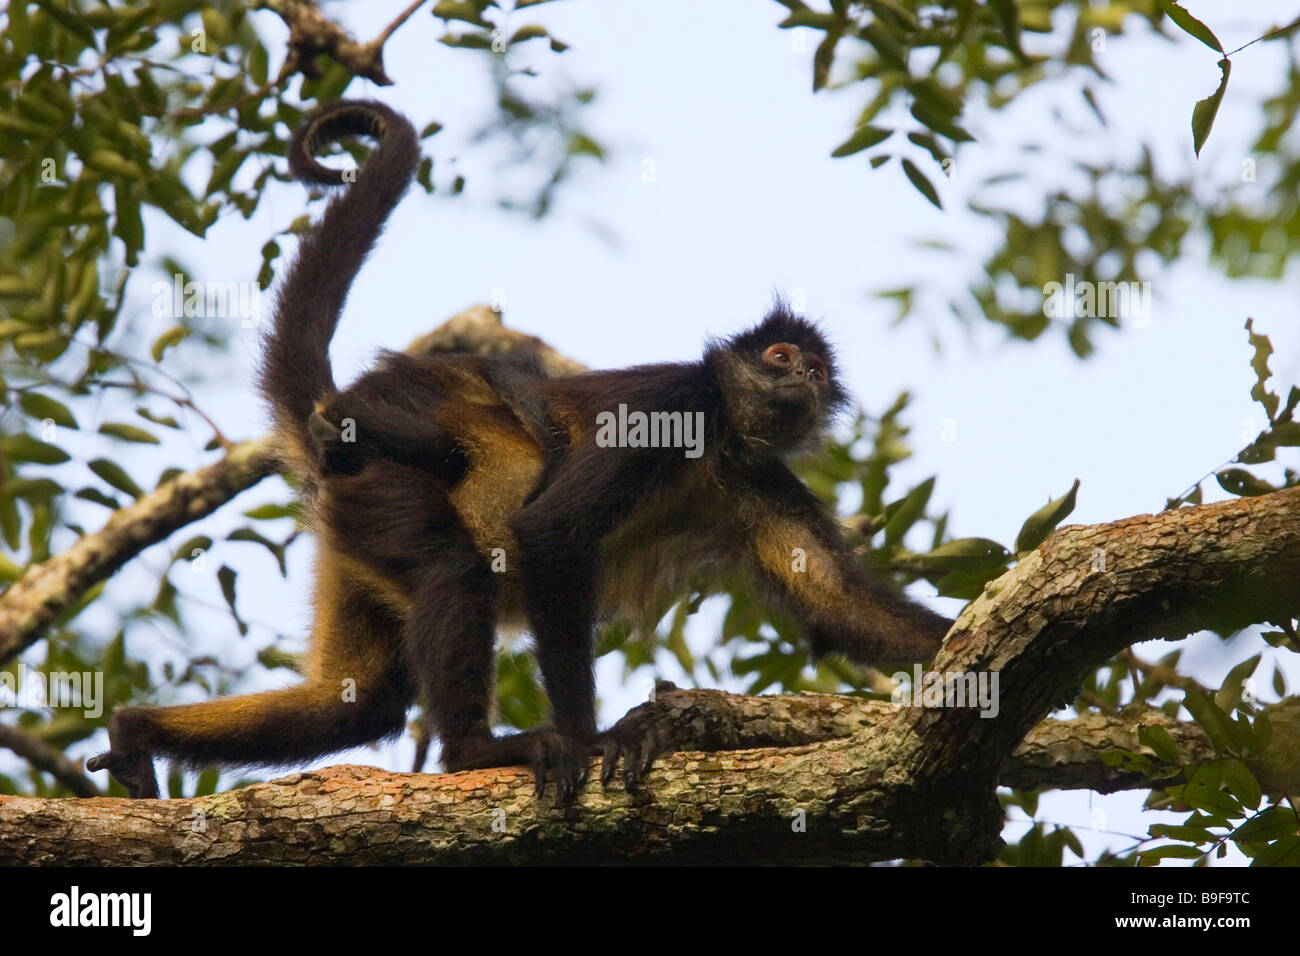 BLACK HANDED or GEOFFROY'S SPIDER MONKEY (Ateles geoffroyi) mother with young clinging to back, Tikal National Park, Guatemala. Stock Photo